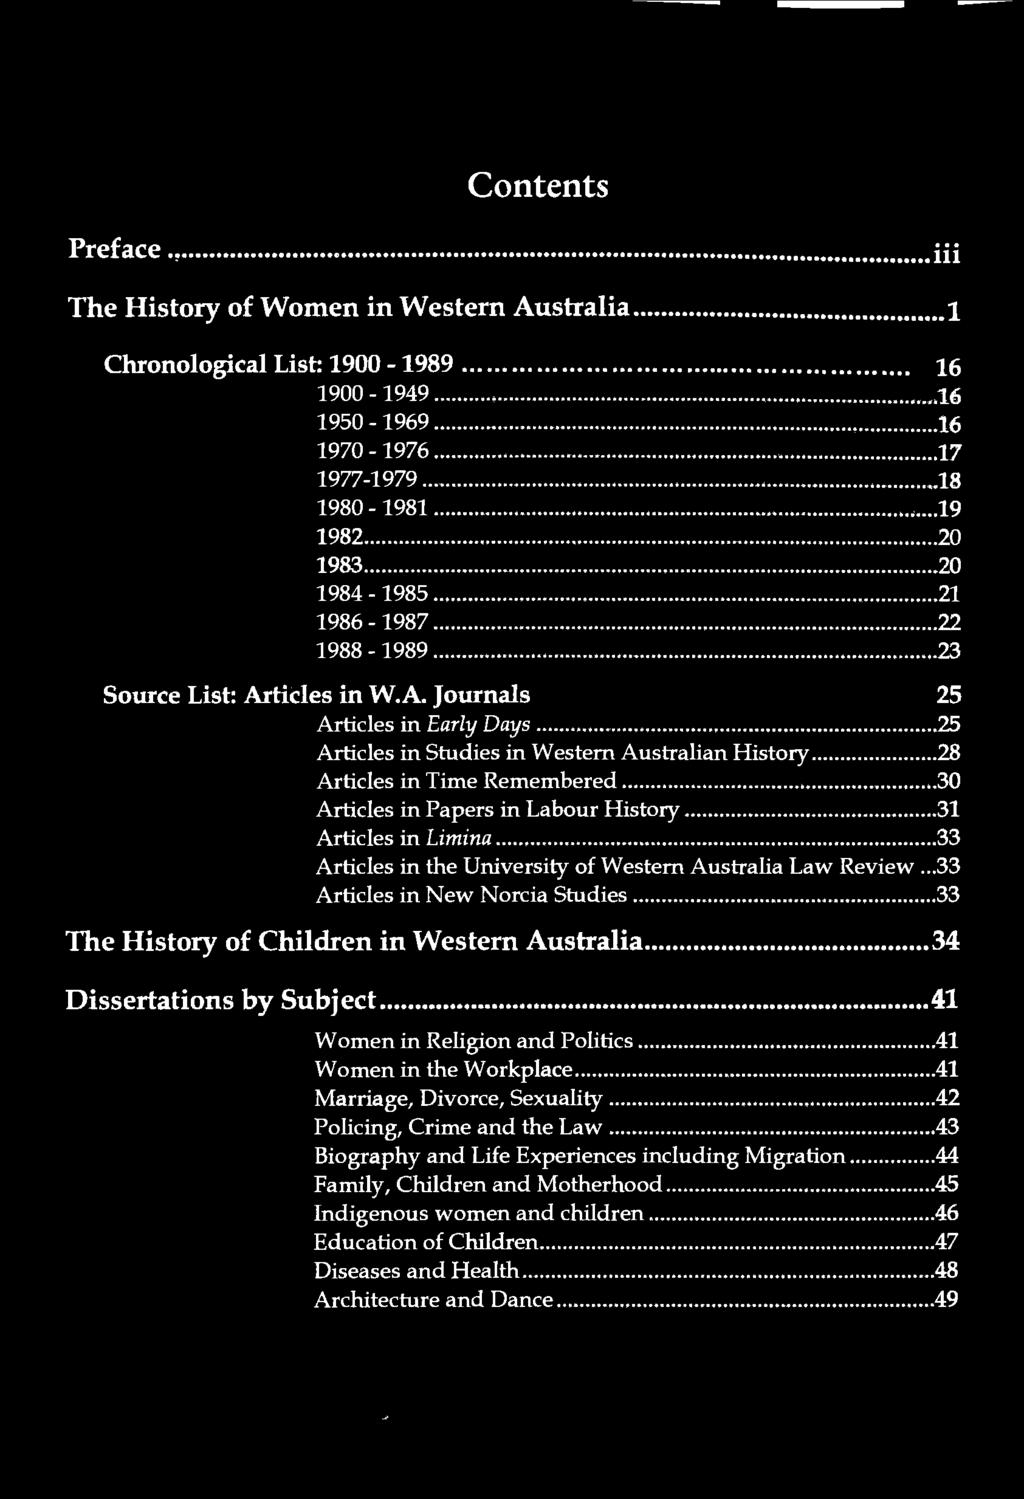 ........ 23 Source List: Articles in W.A. Journals 25 Articles in Early Days................... 25 Articles in Studies in Western Australian History... 28 Articles in Time Remembered.